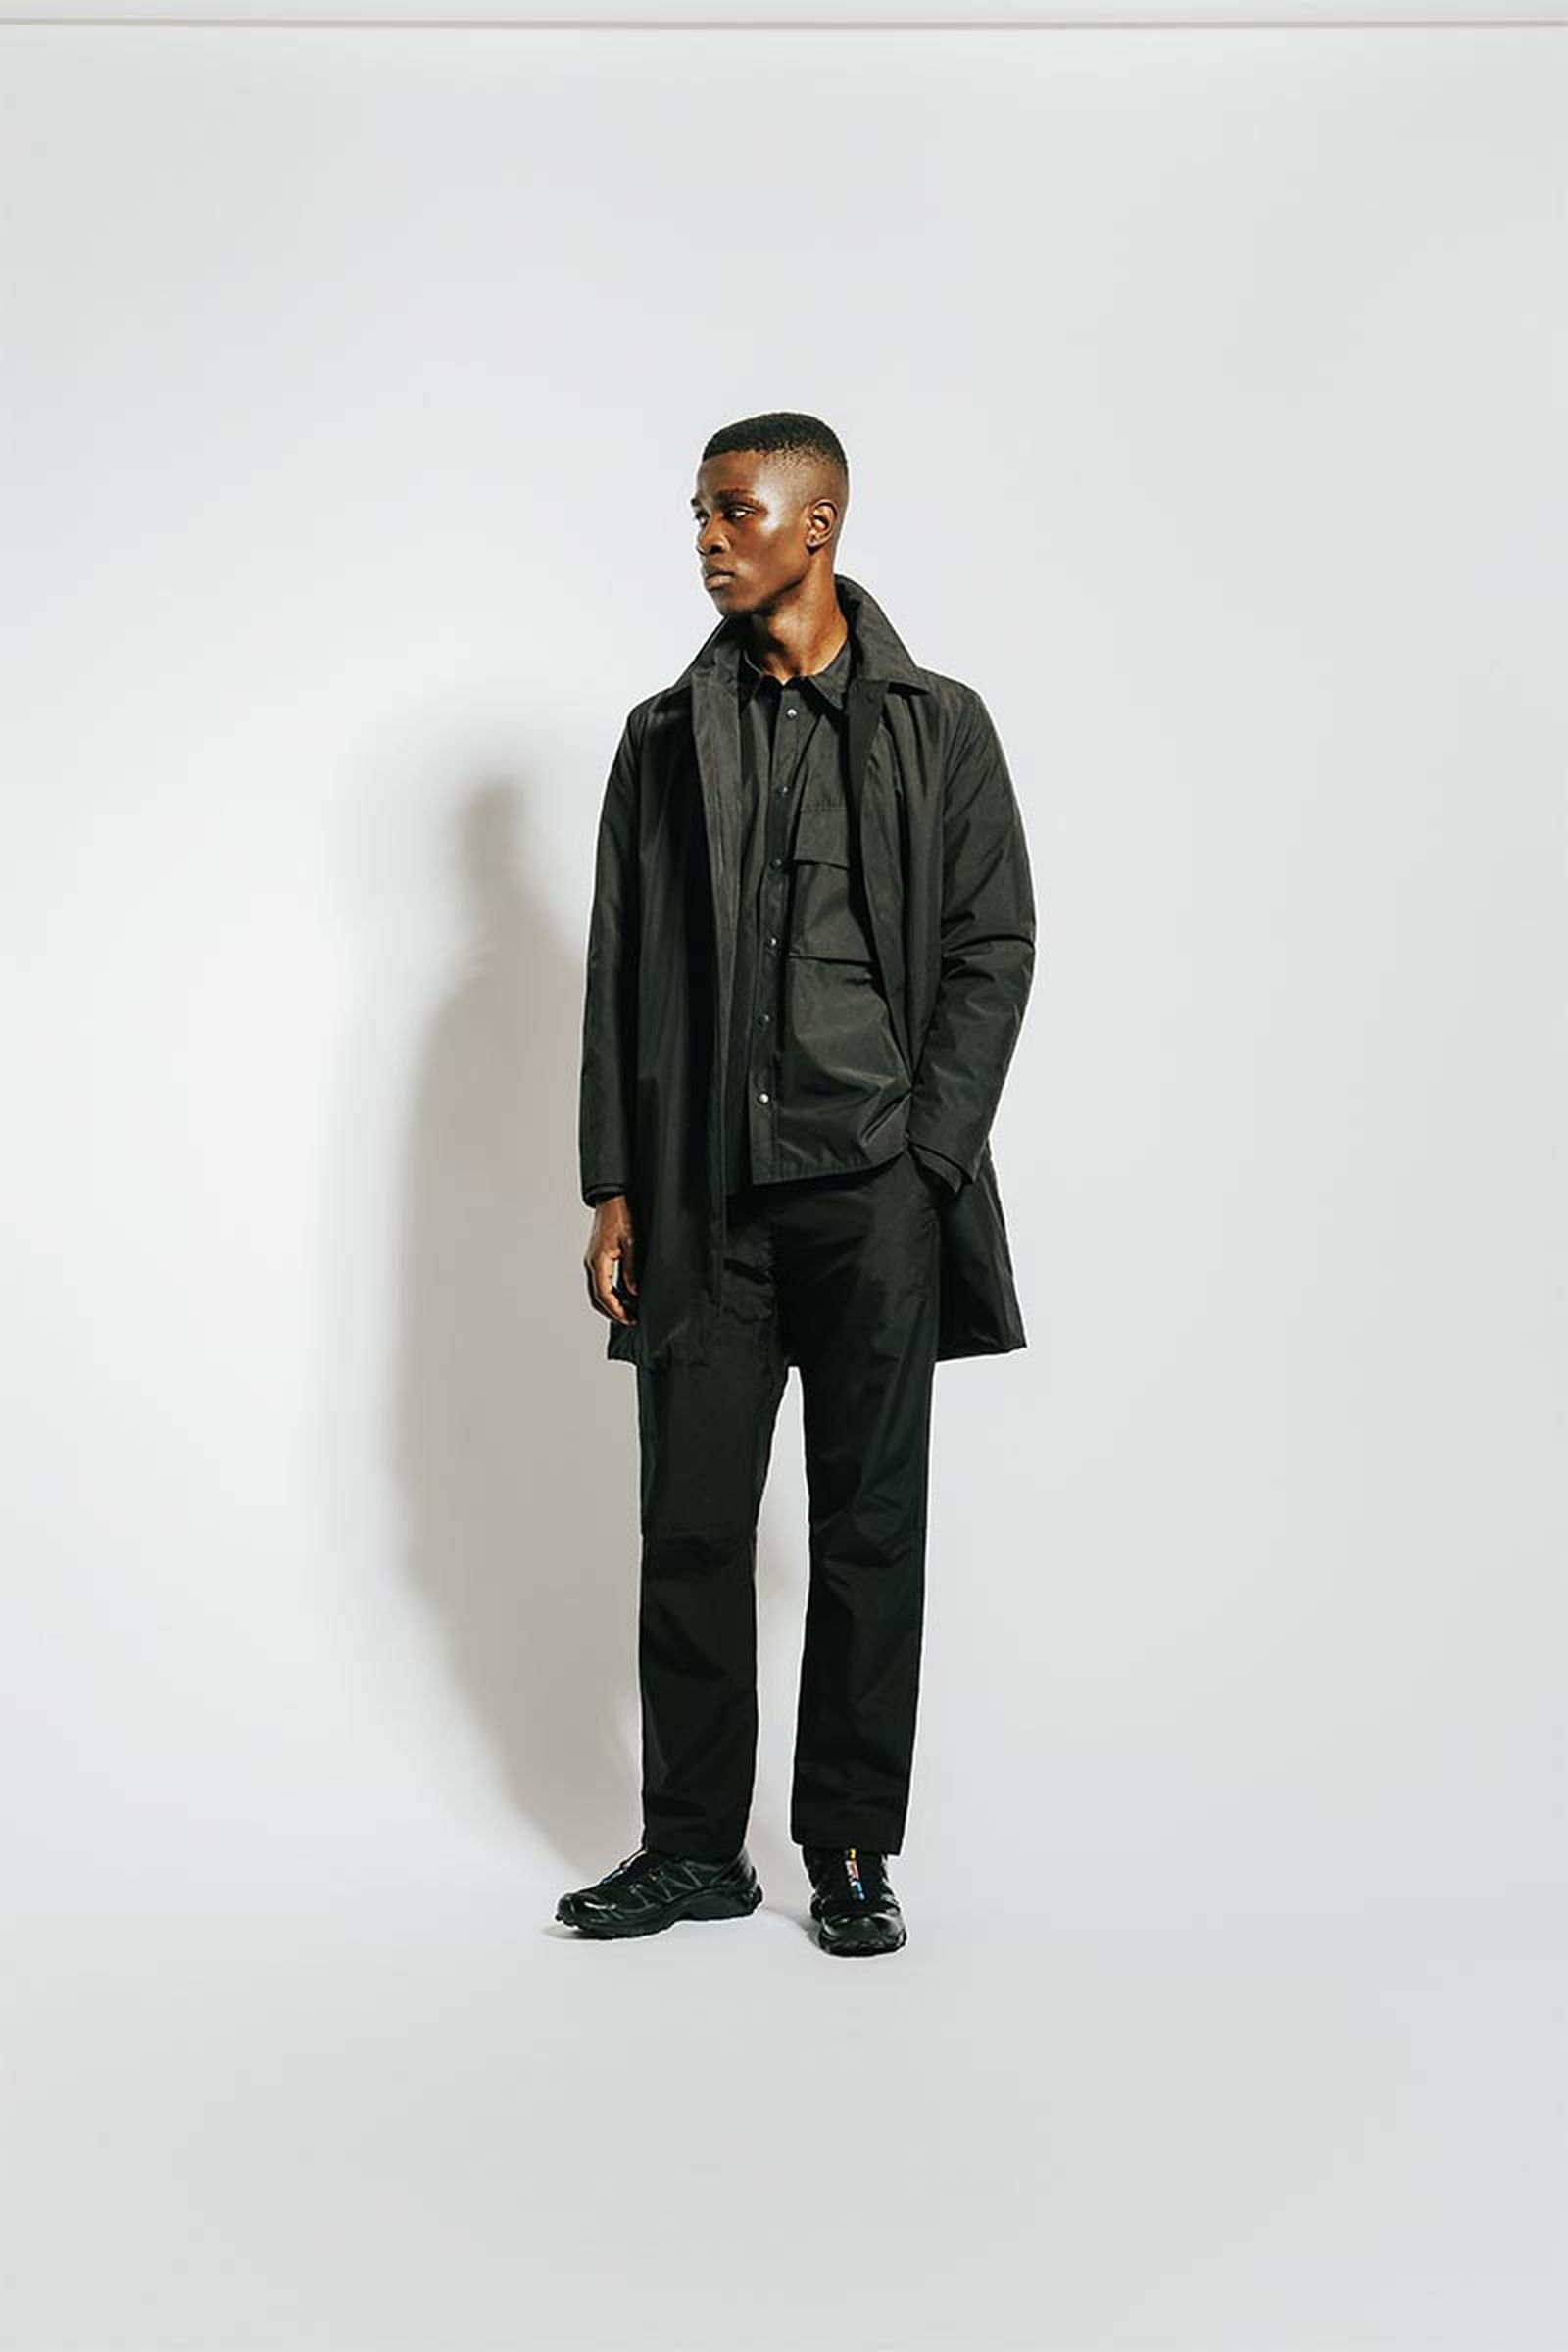 norse-projects-ss22_0011_NP-SS22-LOOKBOOK-22